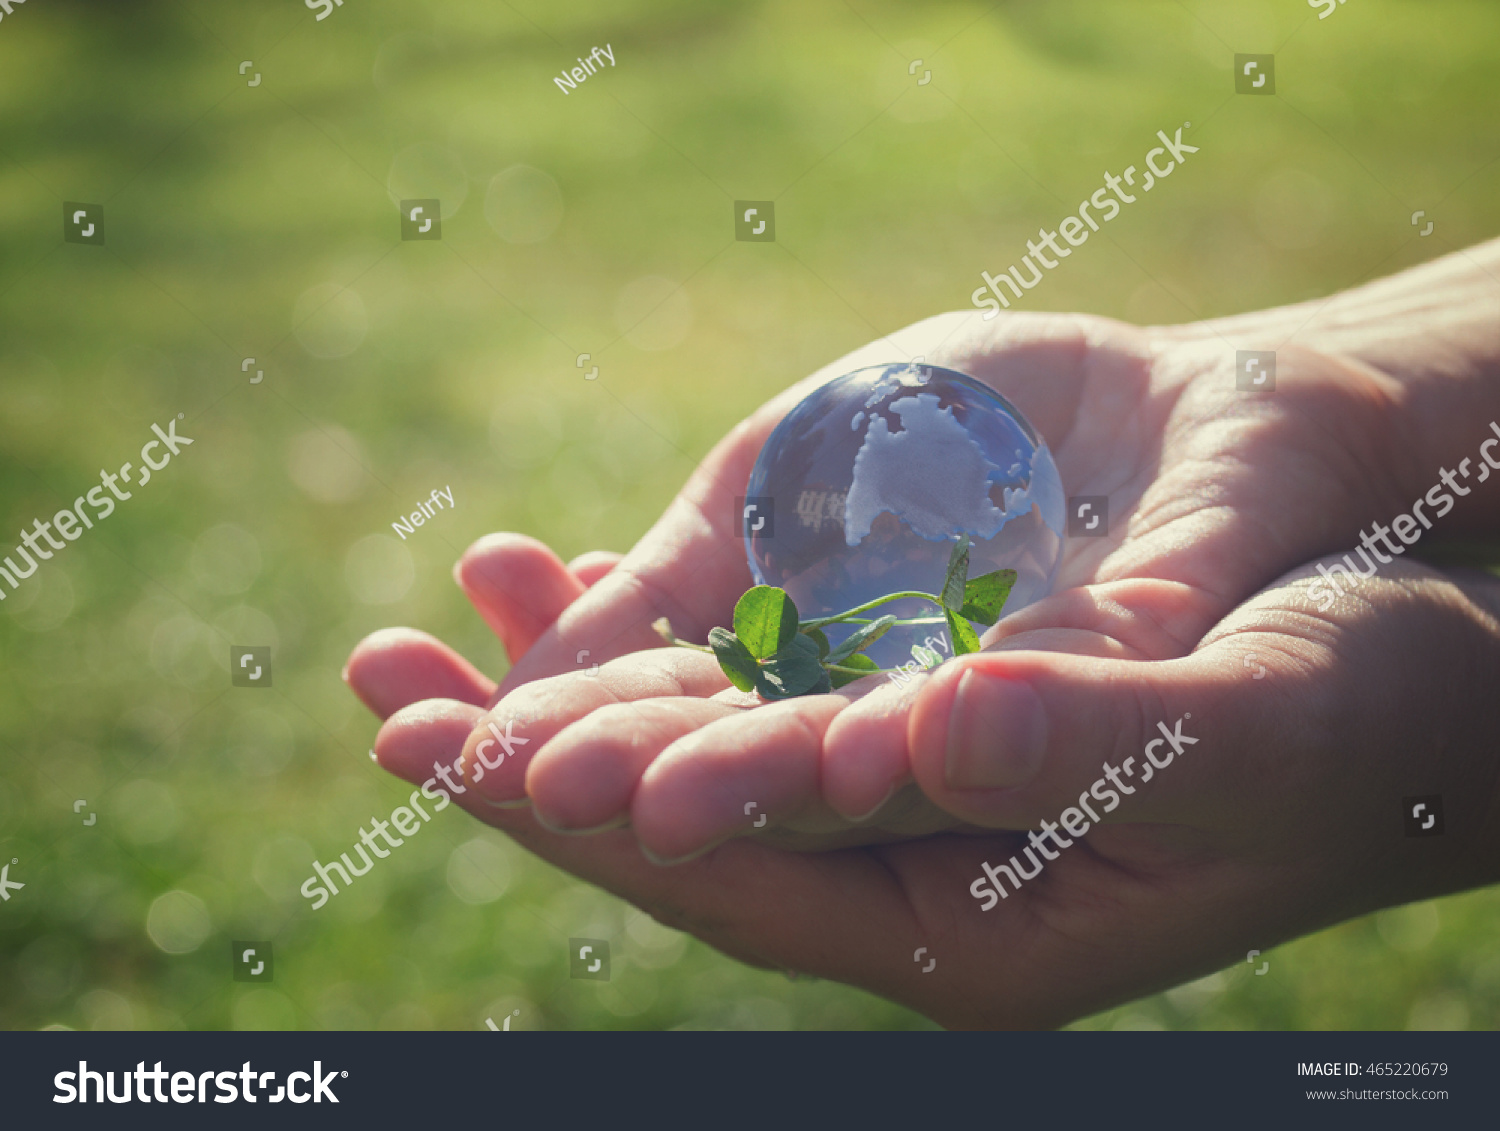 Two hands holding glass globe outdoor, concept for environment protection, retro toned #465220679